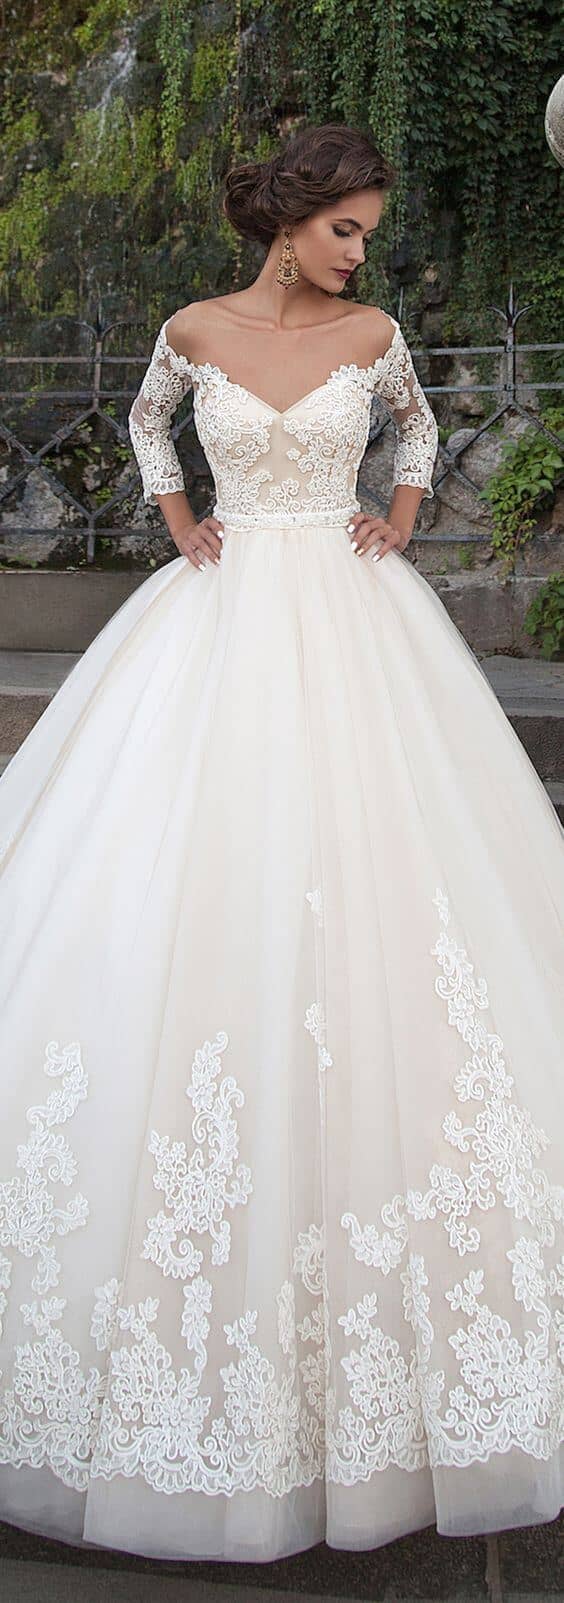 Off-the-Shoulder 3/4 Sleeve Sweetheart Gown